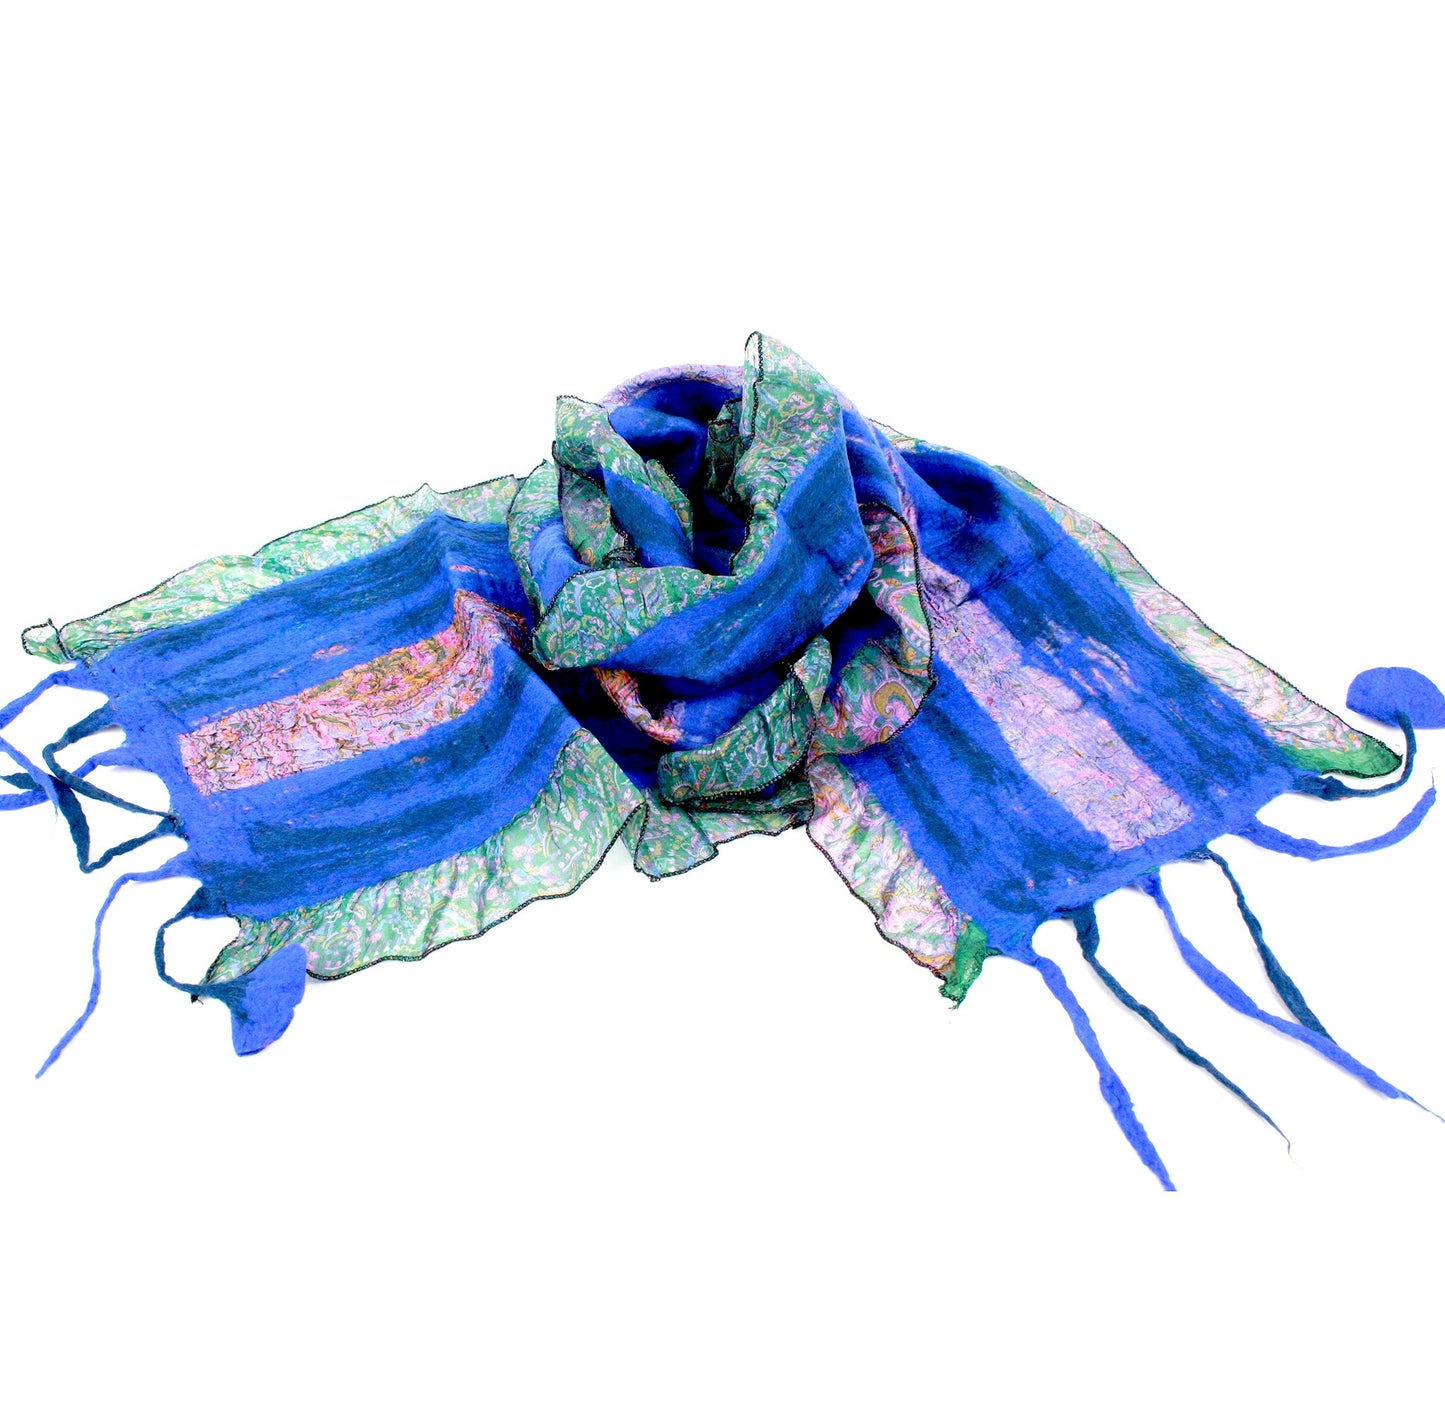 Sari collage scarf in royal blue, green and pinks